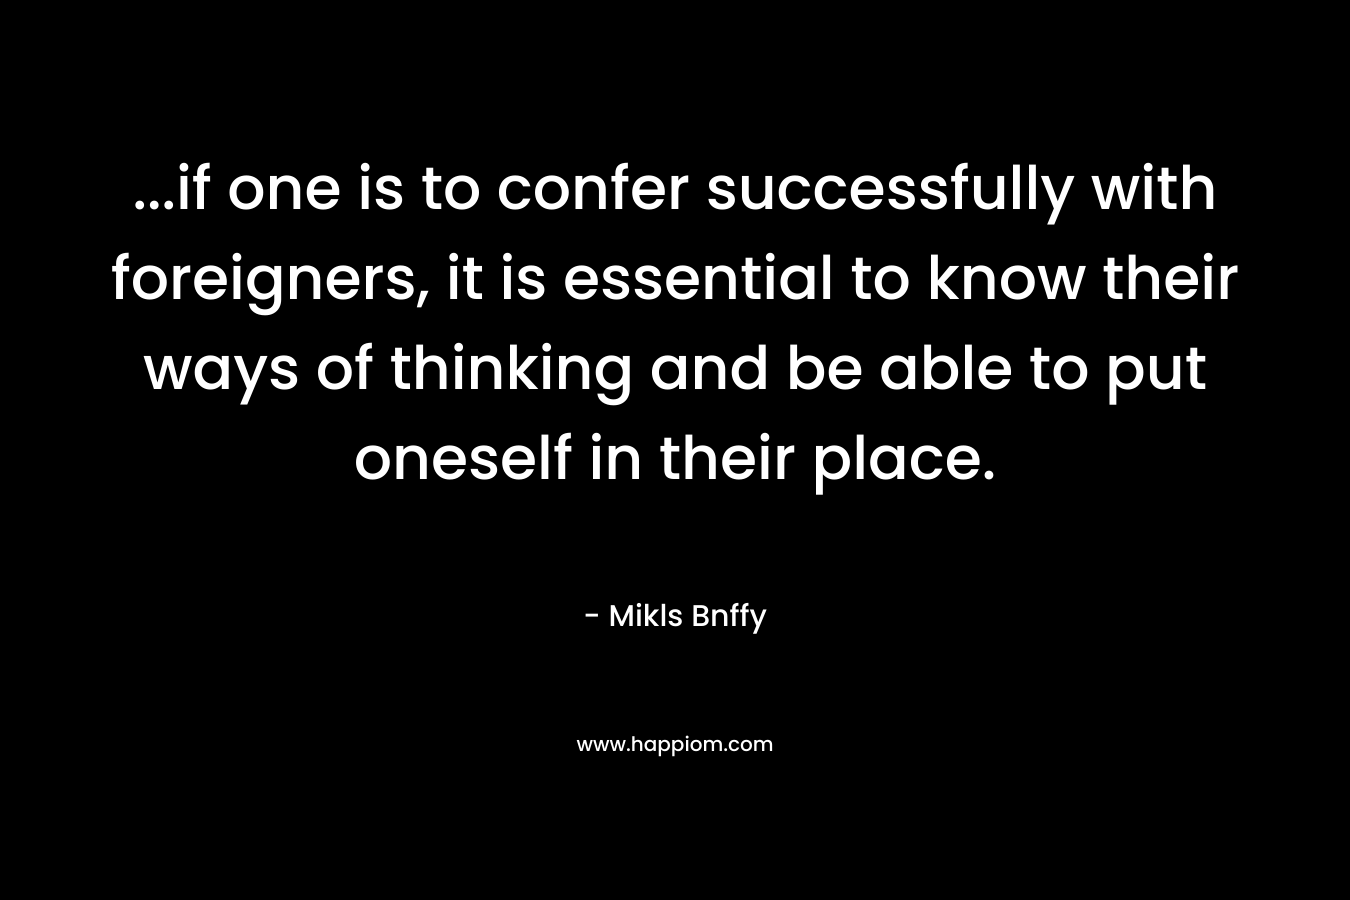 …if one is to confer successfully with foreigners, it is essential to know their ways of thinking and be able to put oneself in their place. – Mikls Bnffy